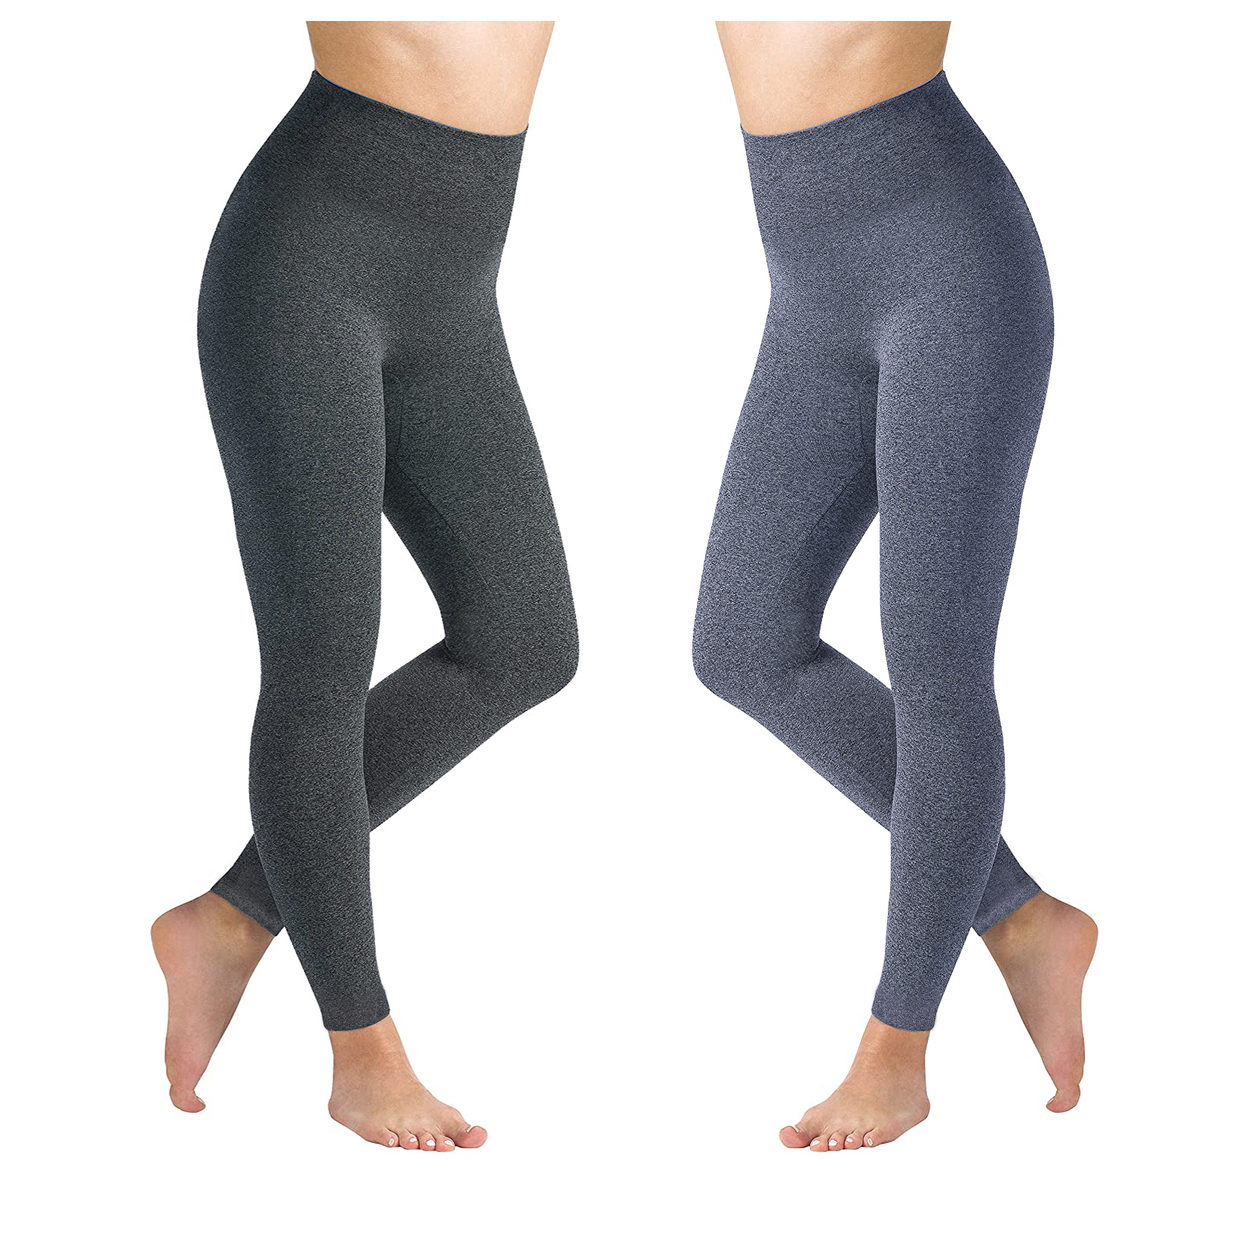 2-Pack: Women's High Waisted Ultra Soft Fleece Lined Warm Marled Leggings(Available In Plus Sizes) - Navy & Navy, Small